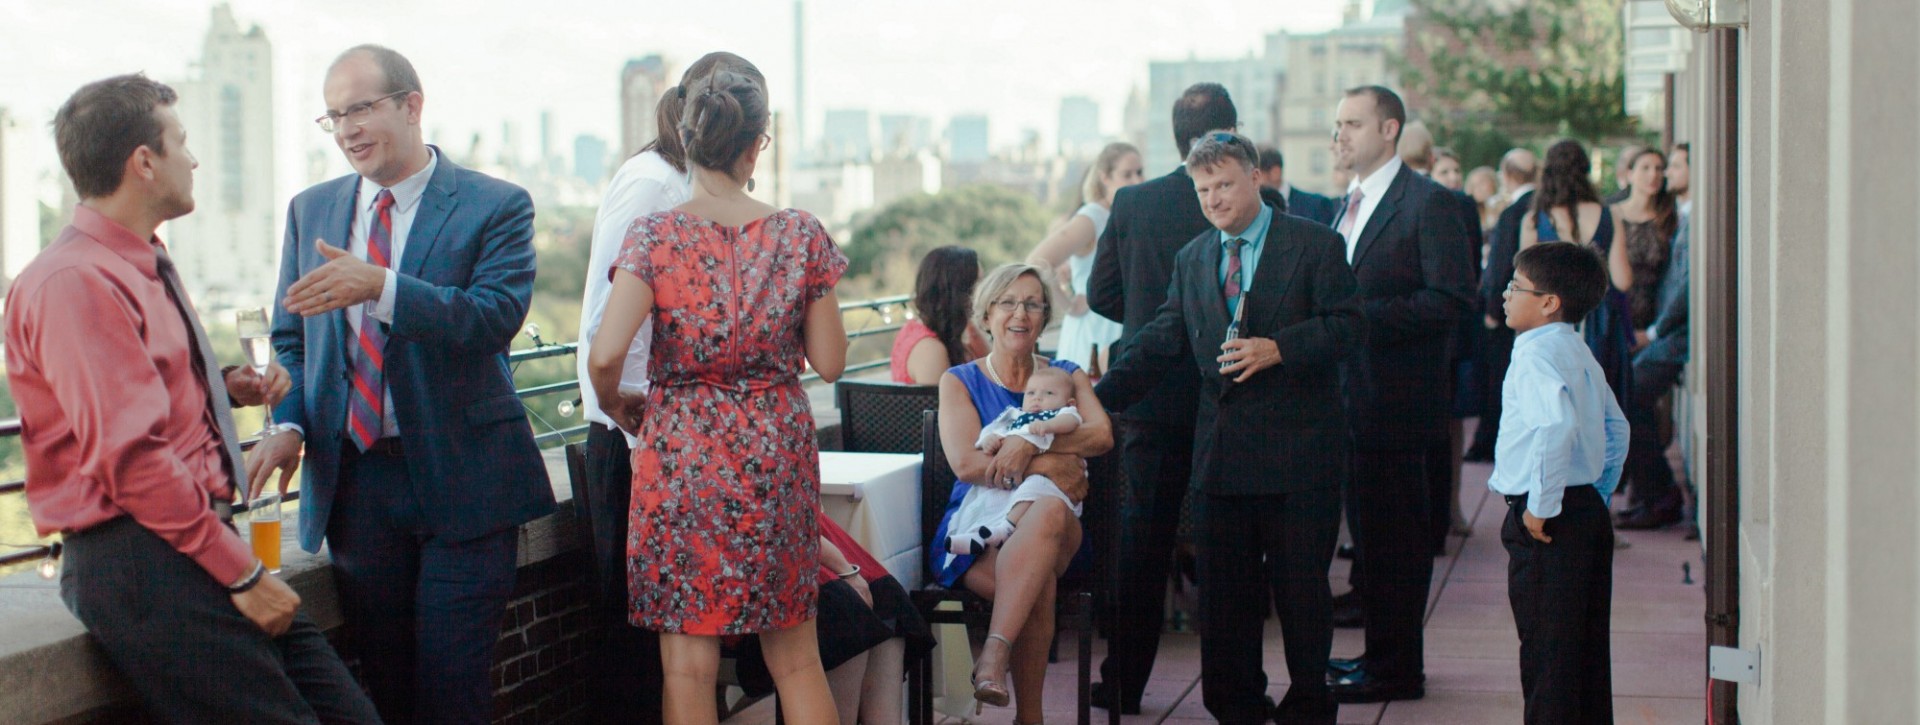 family enjoying a social event together on the Skyline Terrace,